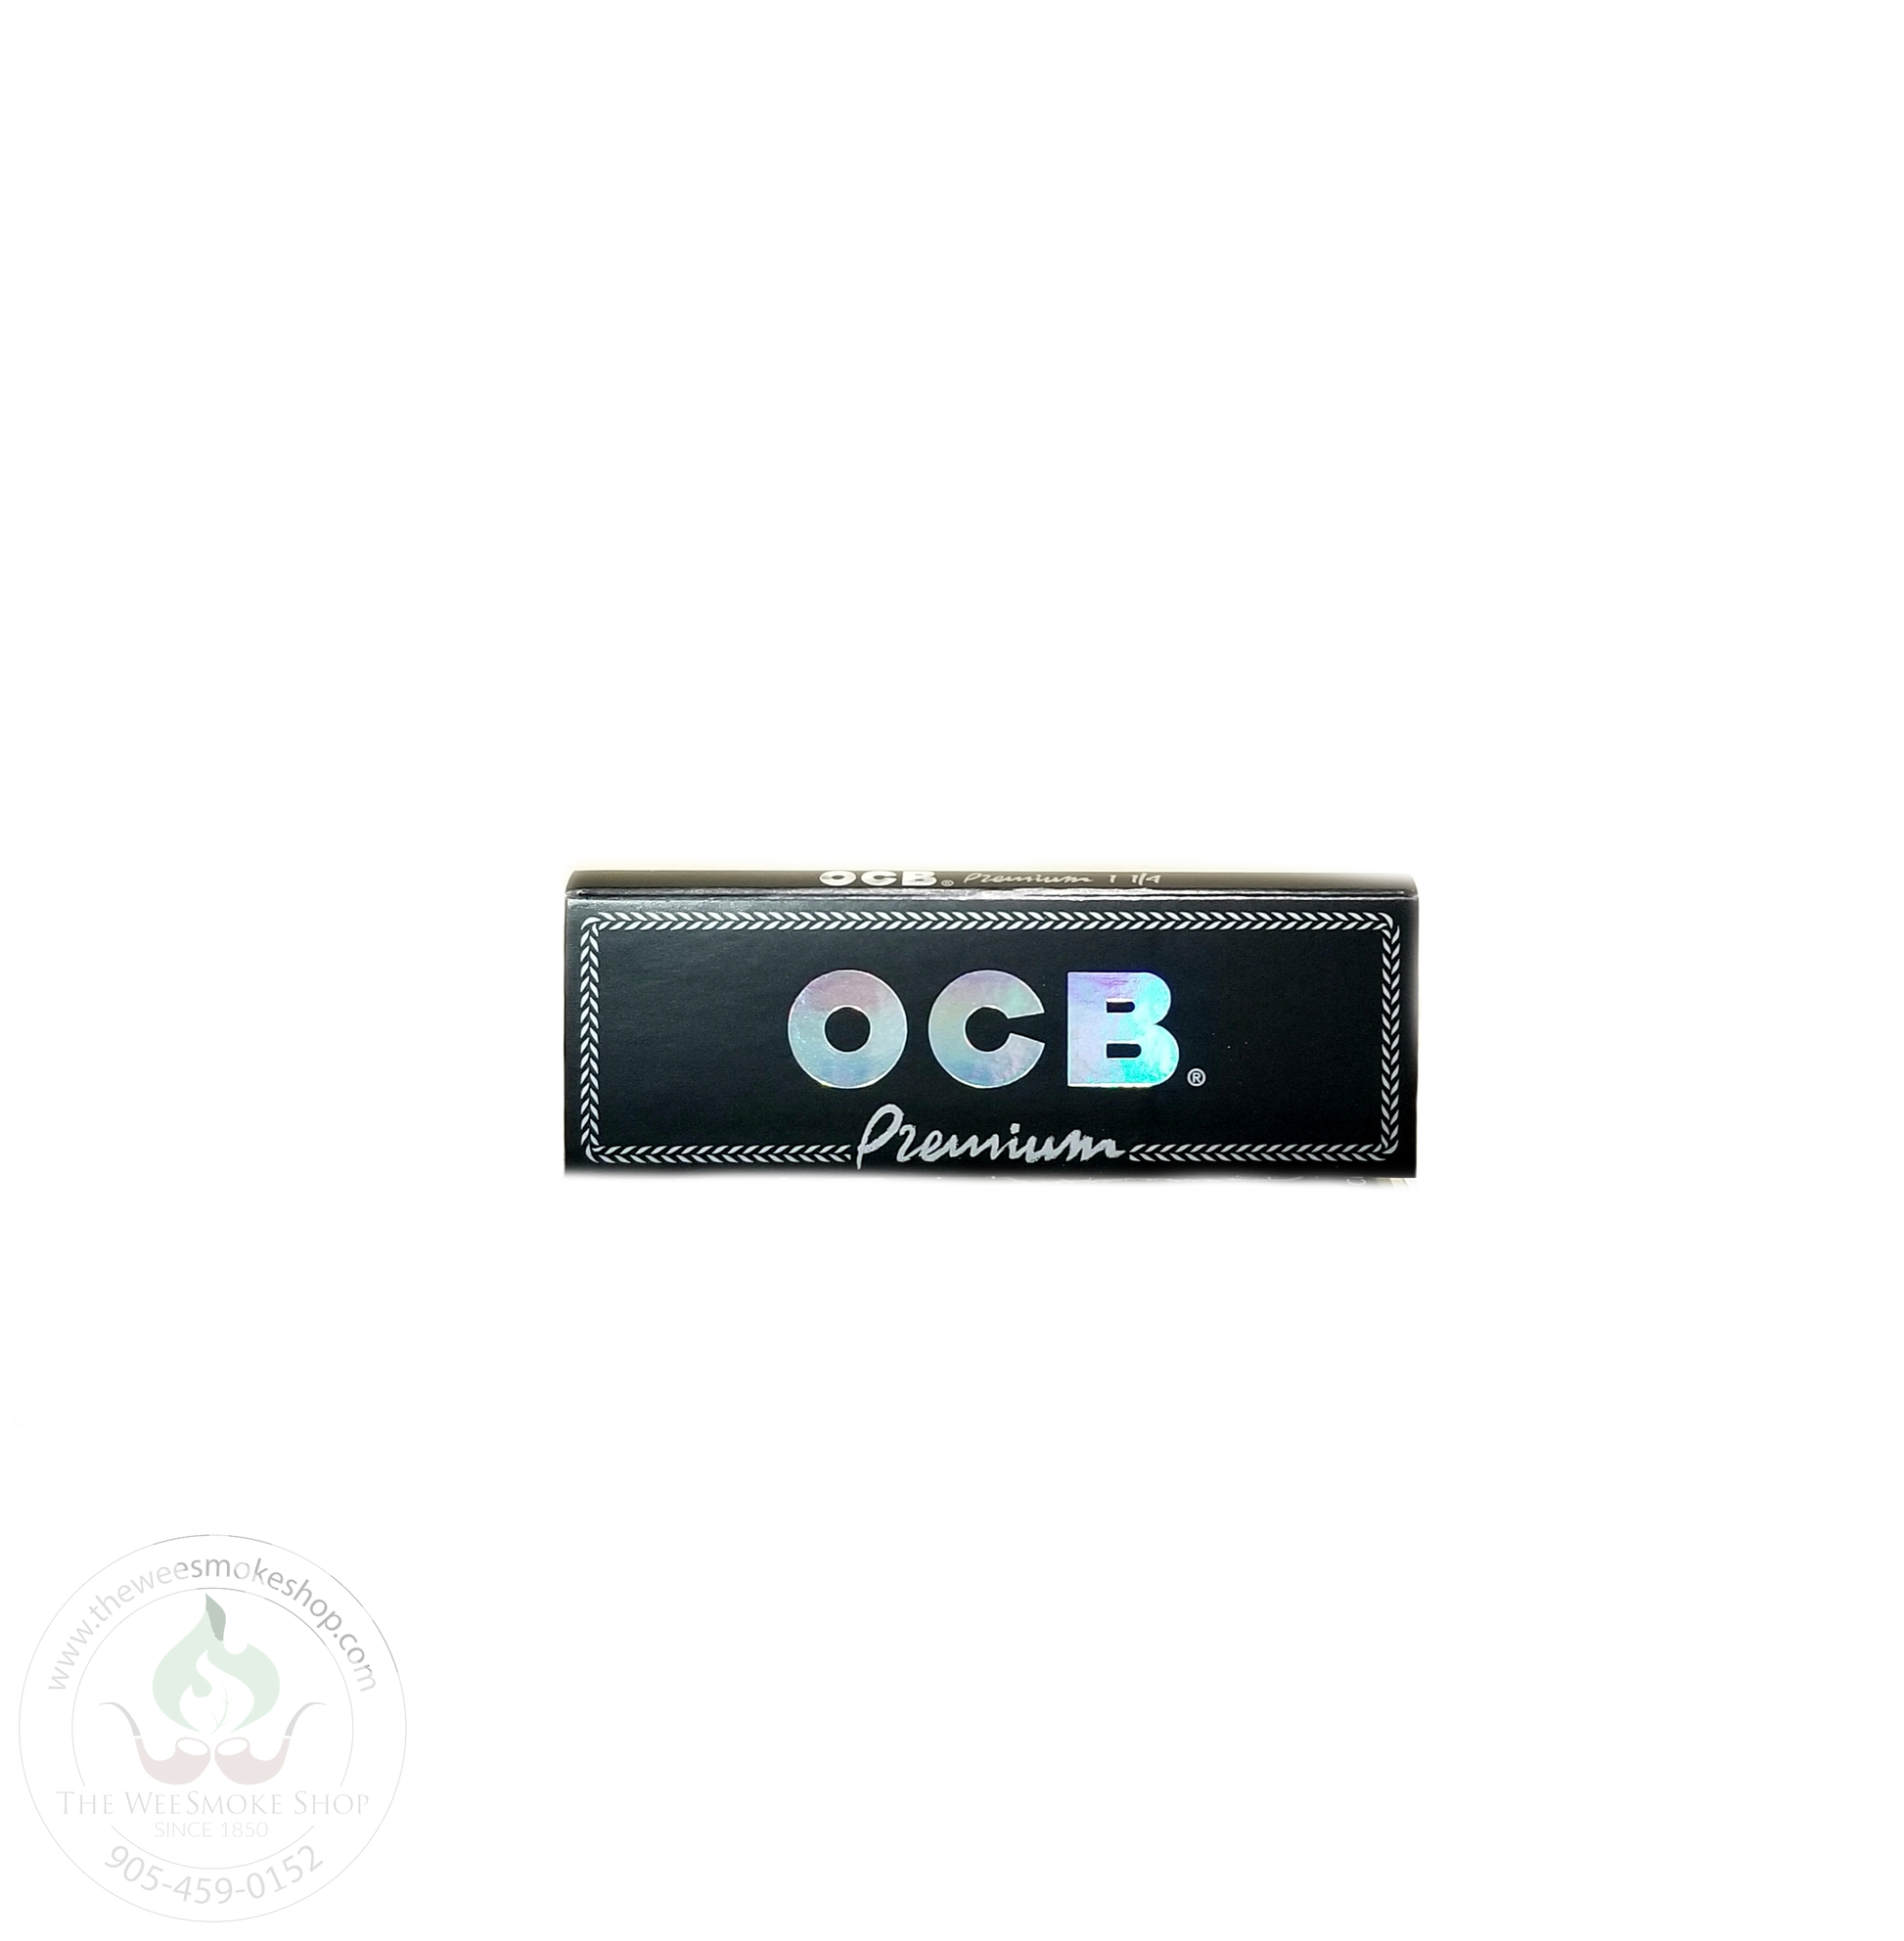 OCB Premium Black Rolling Papers. 1 1/4 size. The Wee Smoke Shop